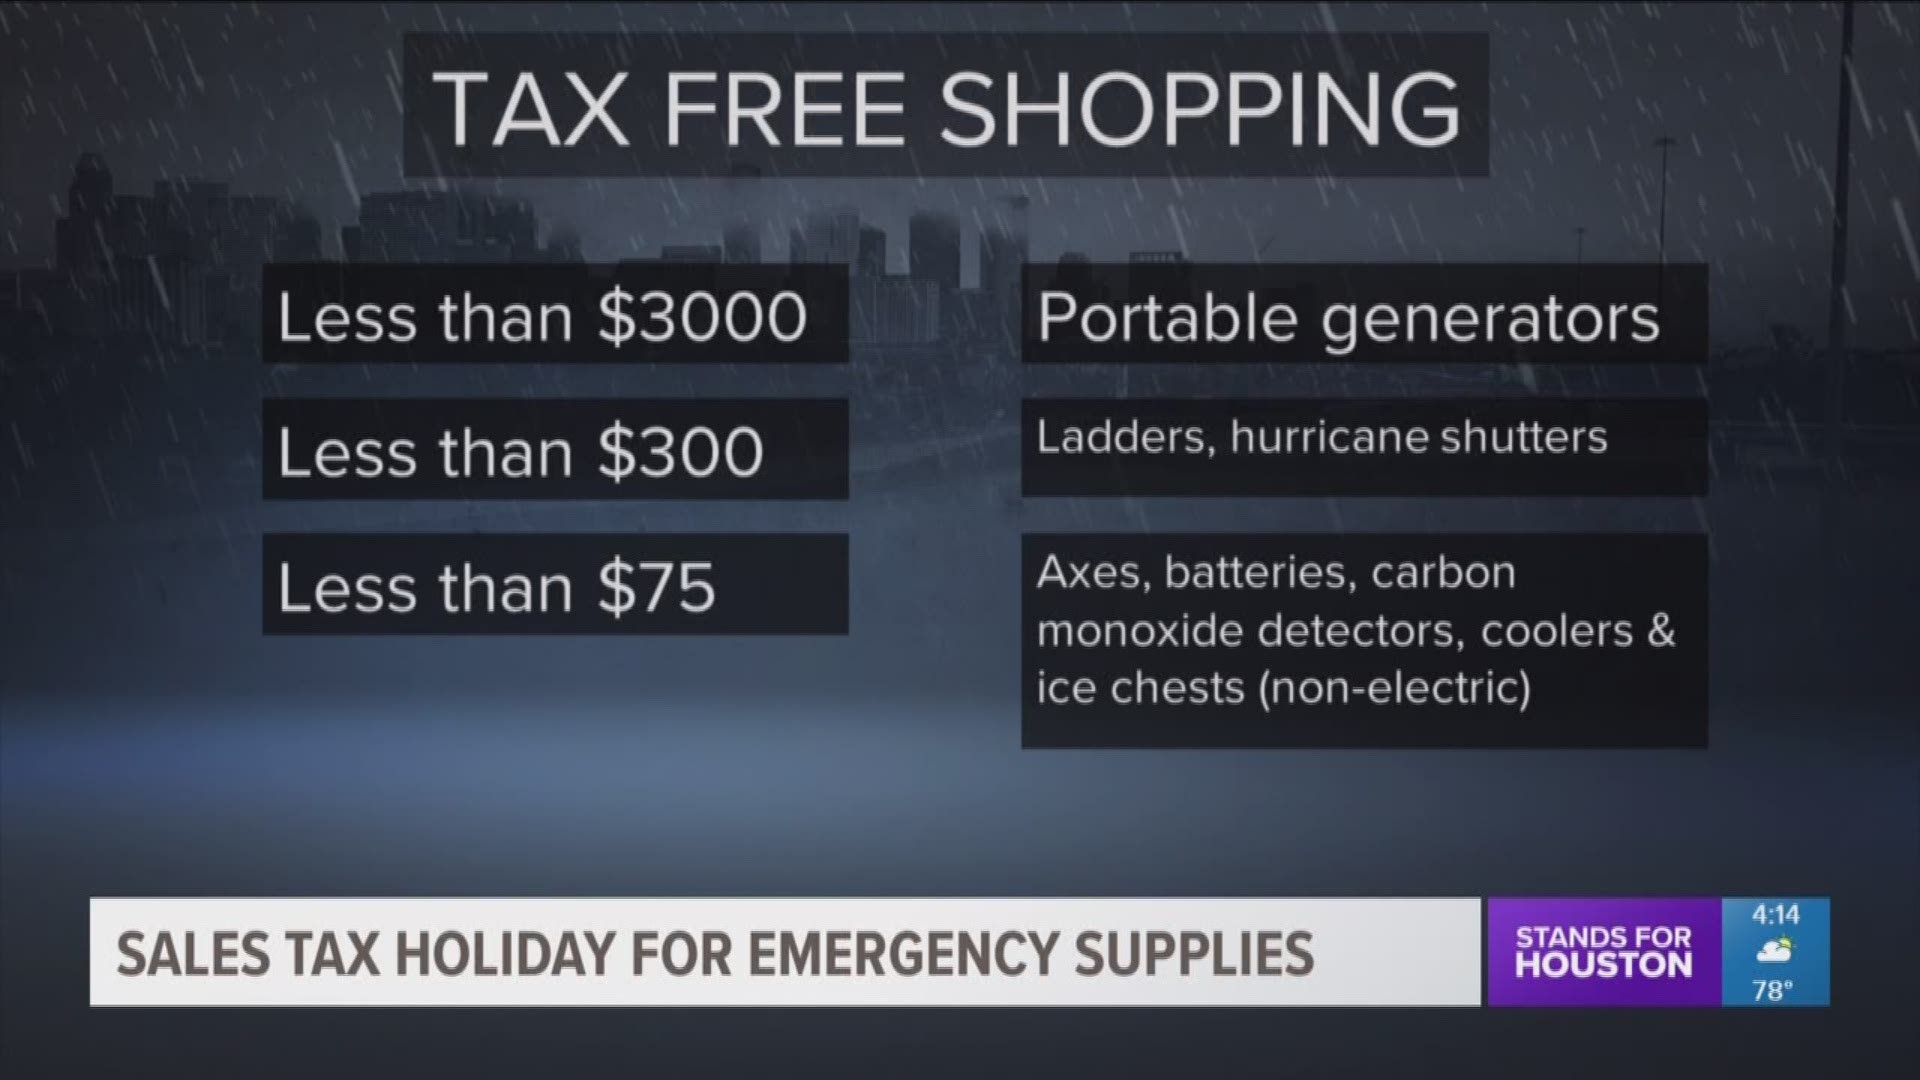 Hurricane Season is only a month away, so be sure to take advantage of the sales tax holiday this weekend and stock up on emergency supplies.